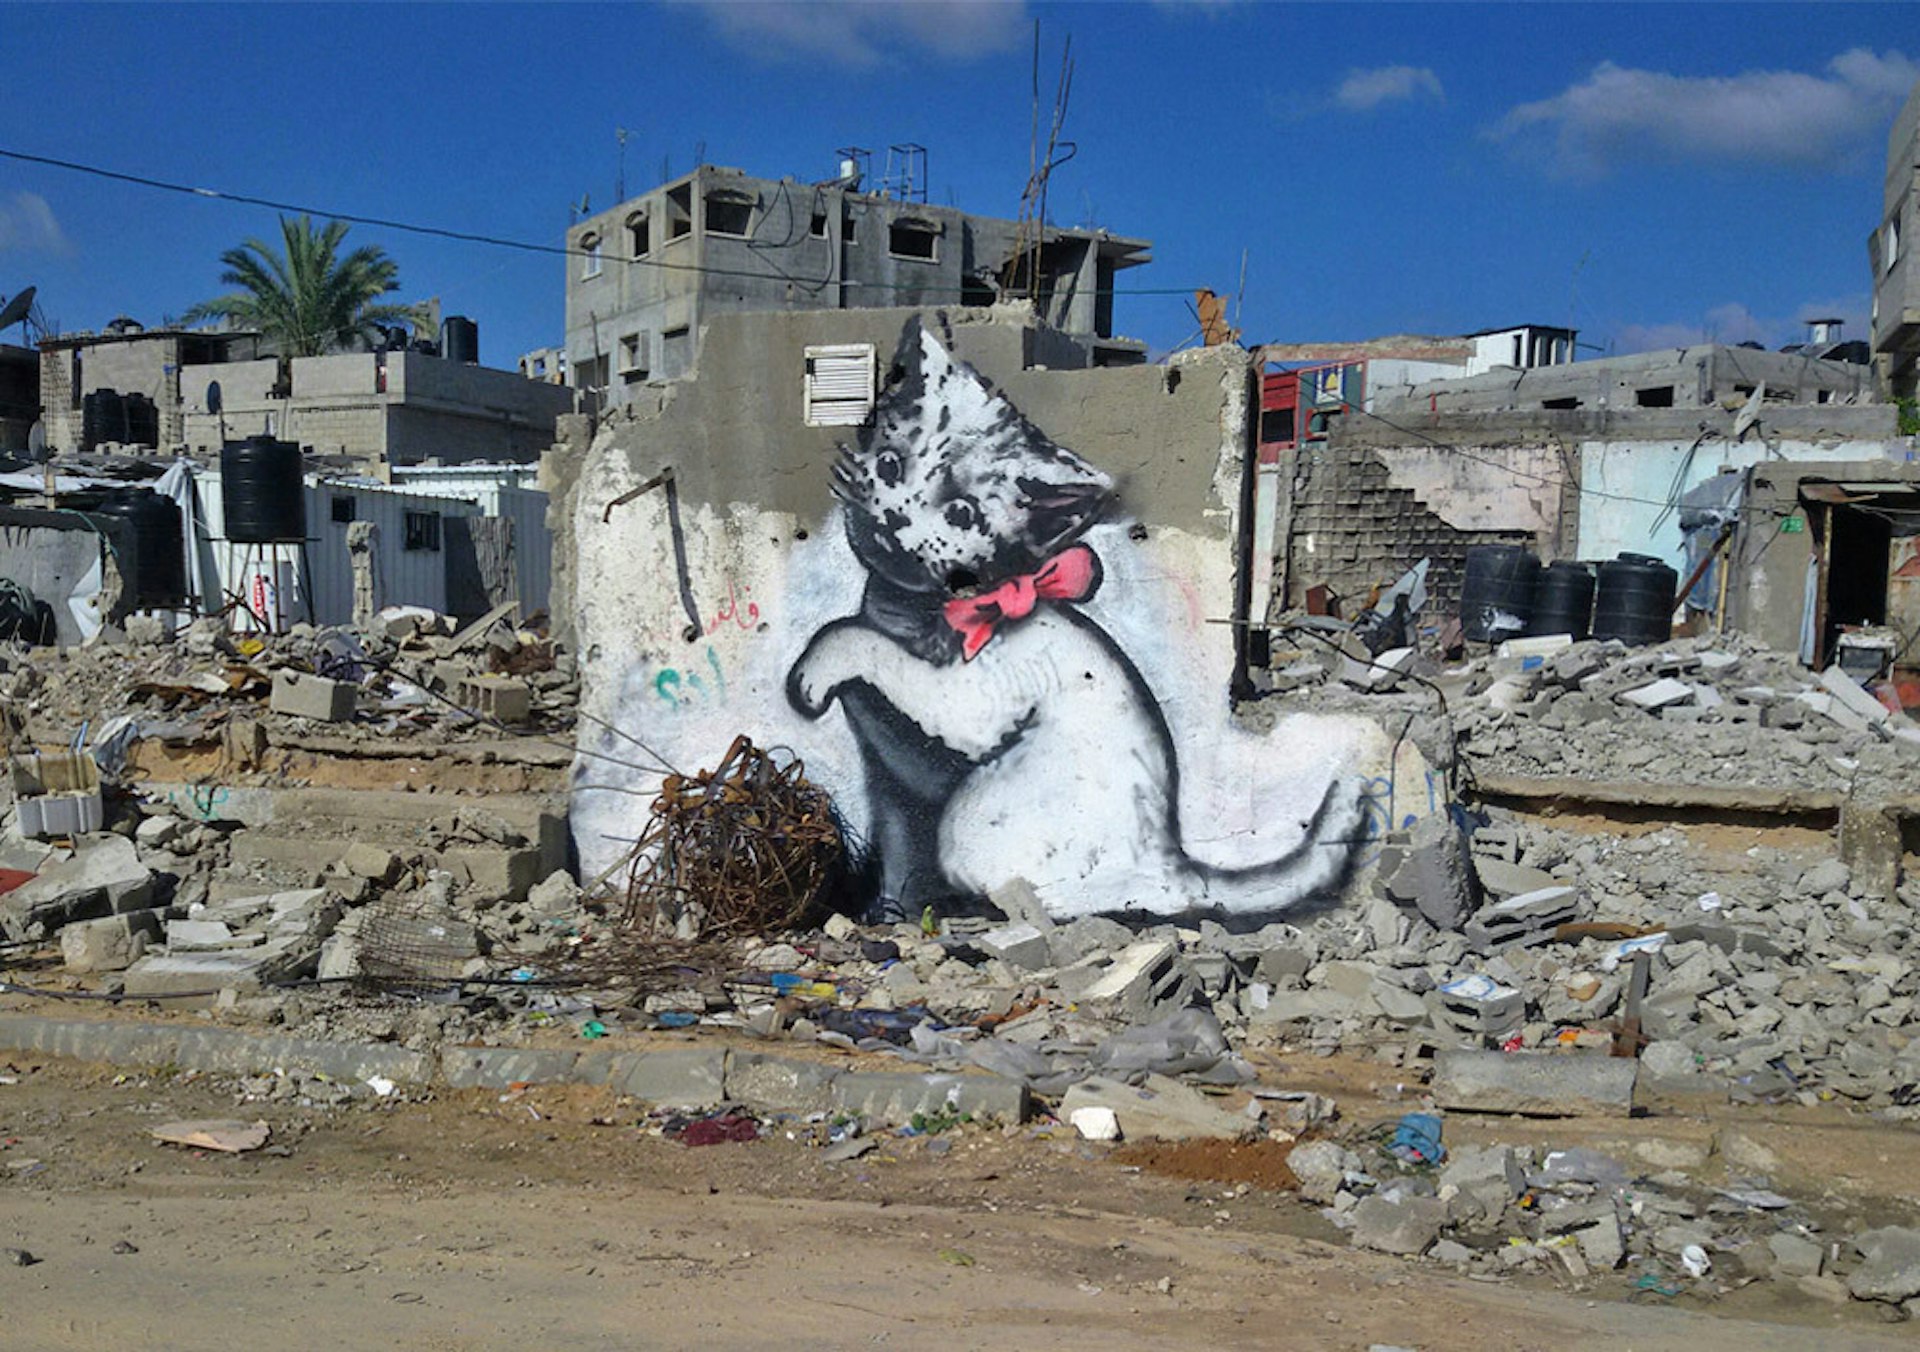 Banksy paints cute cat to draw attention to horrors in Gaza